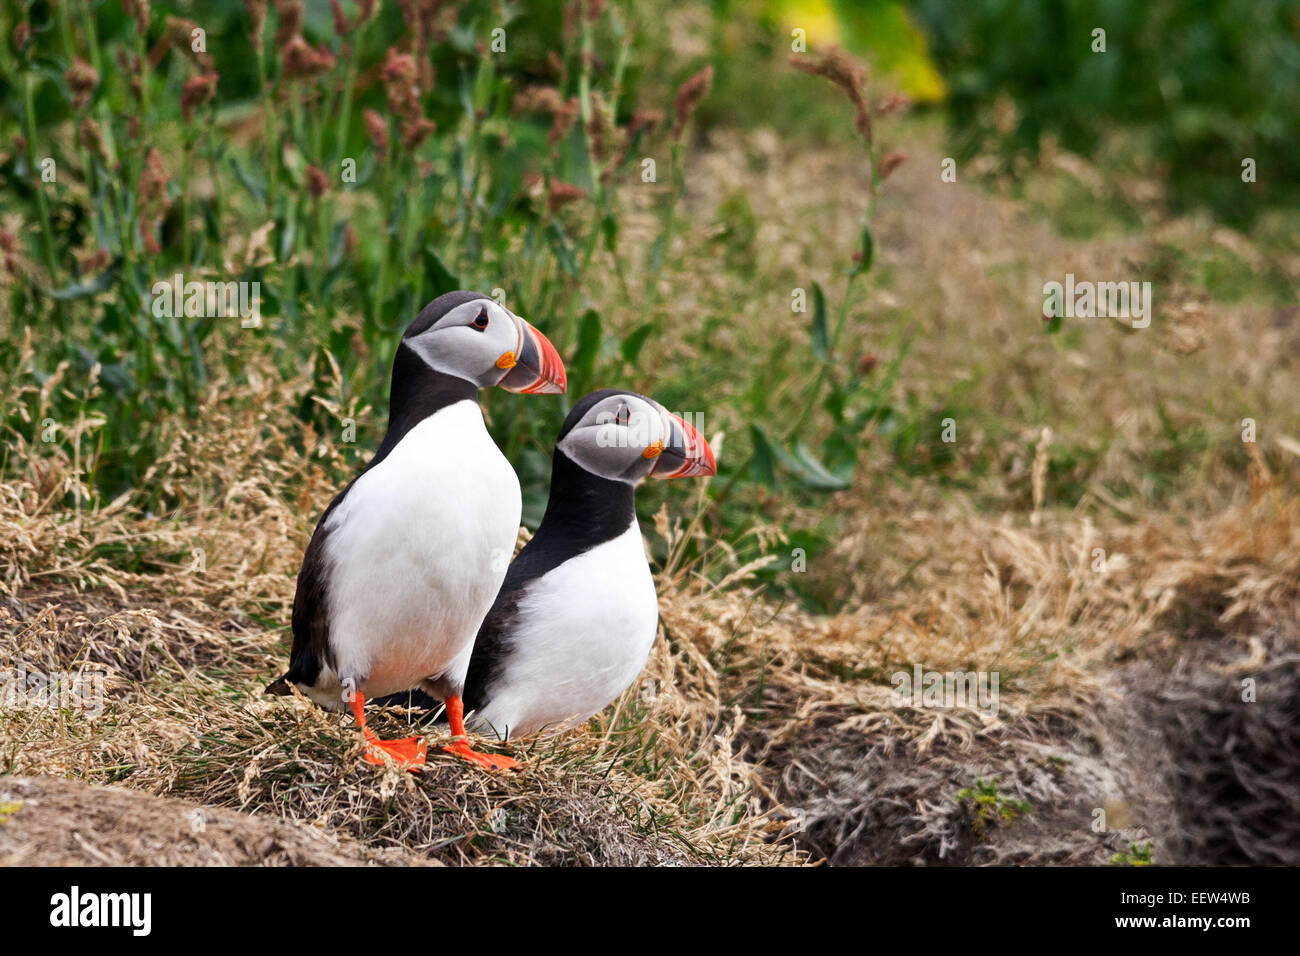 Atlantic puffin pair stands on grassy slope in Iceland near Dyrholaey.  Bright colors of beaks visible. Stock Photo